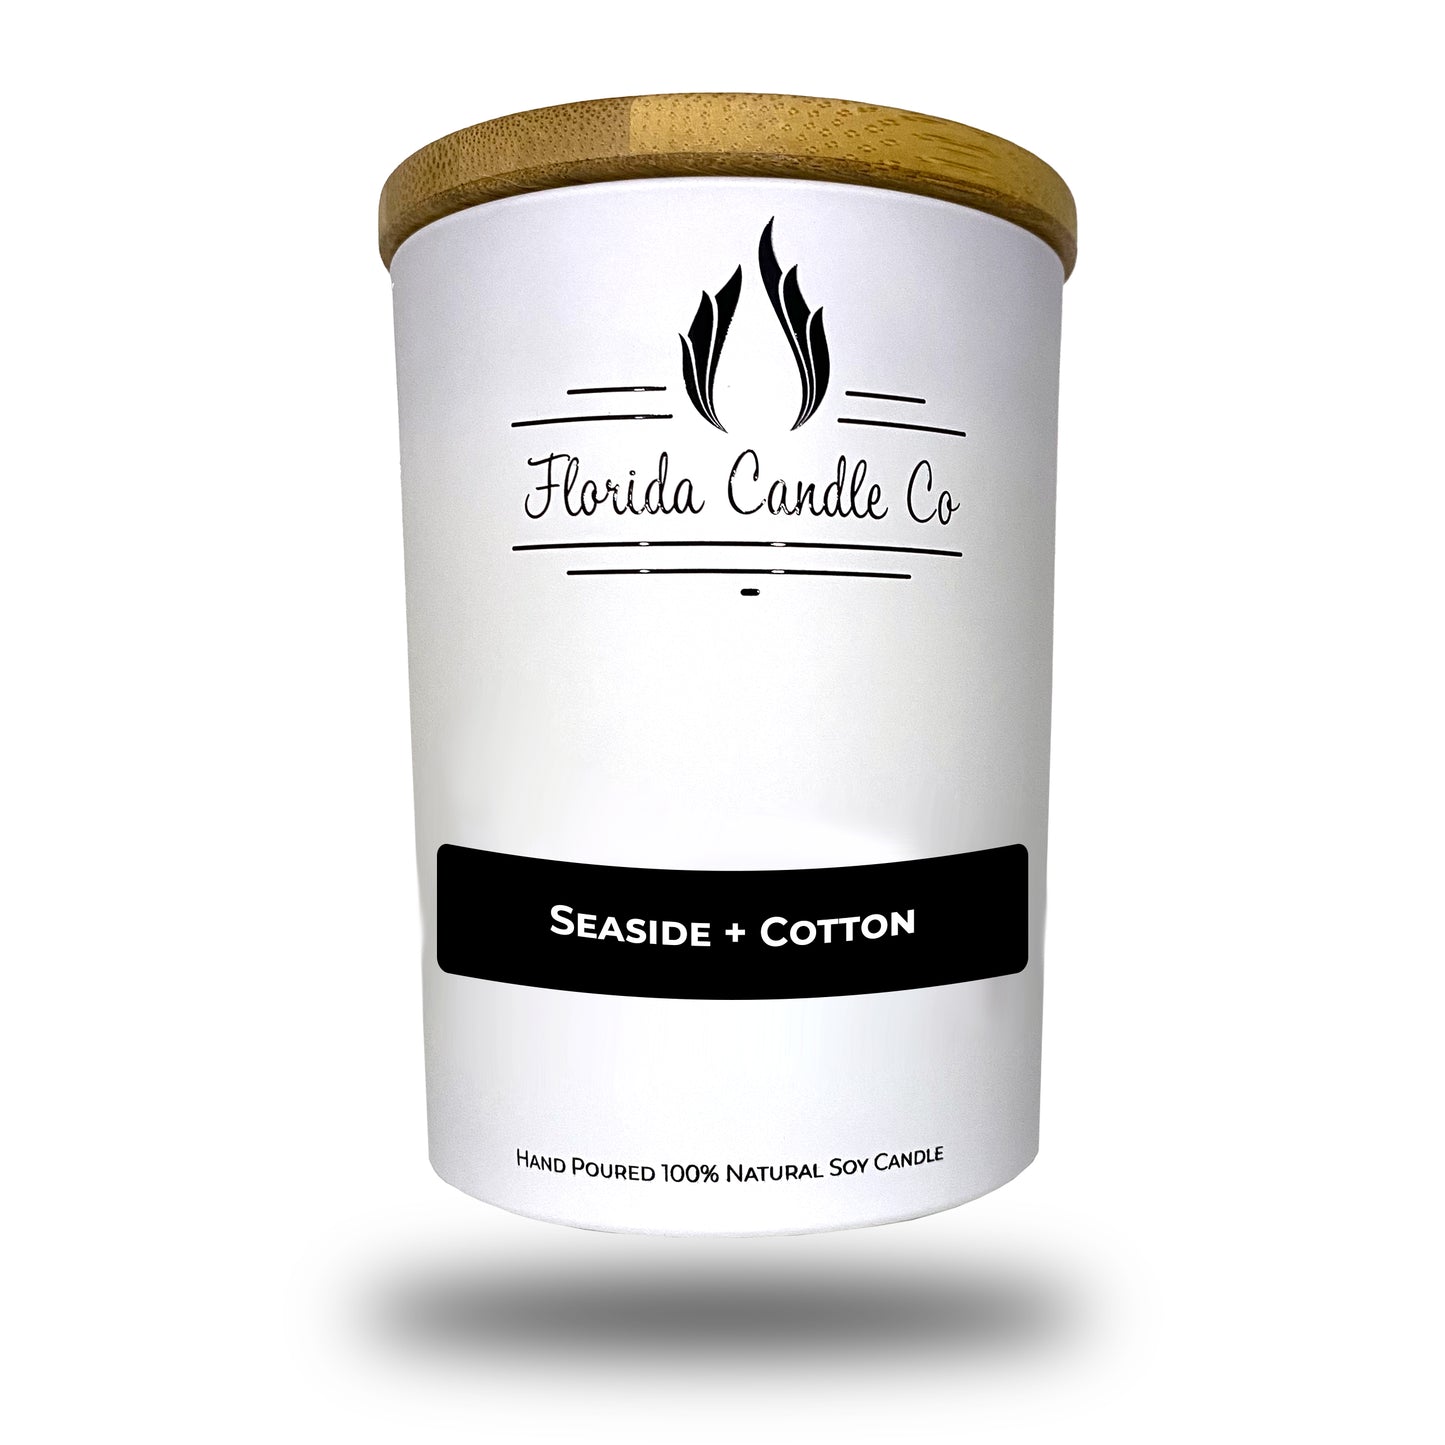 Seaside + Cotton Soy Candle